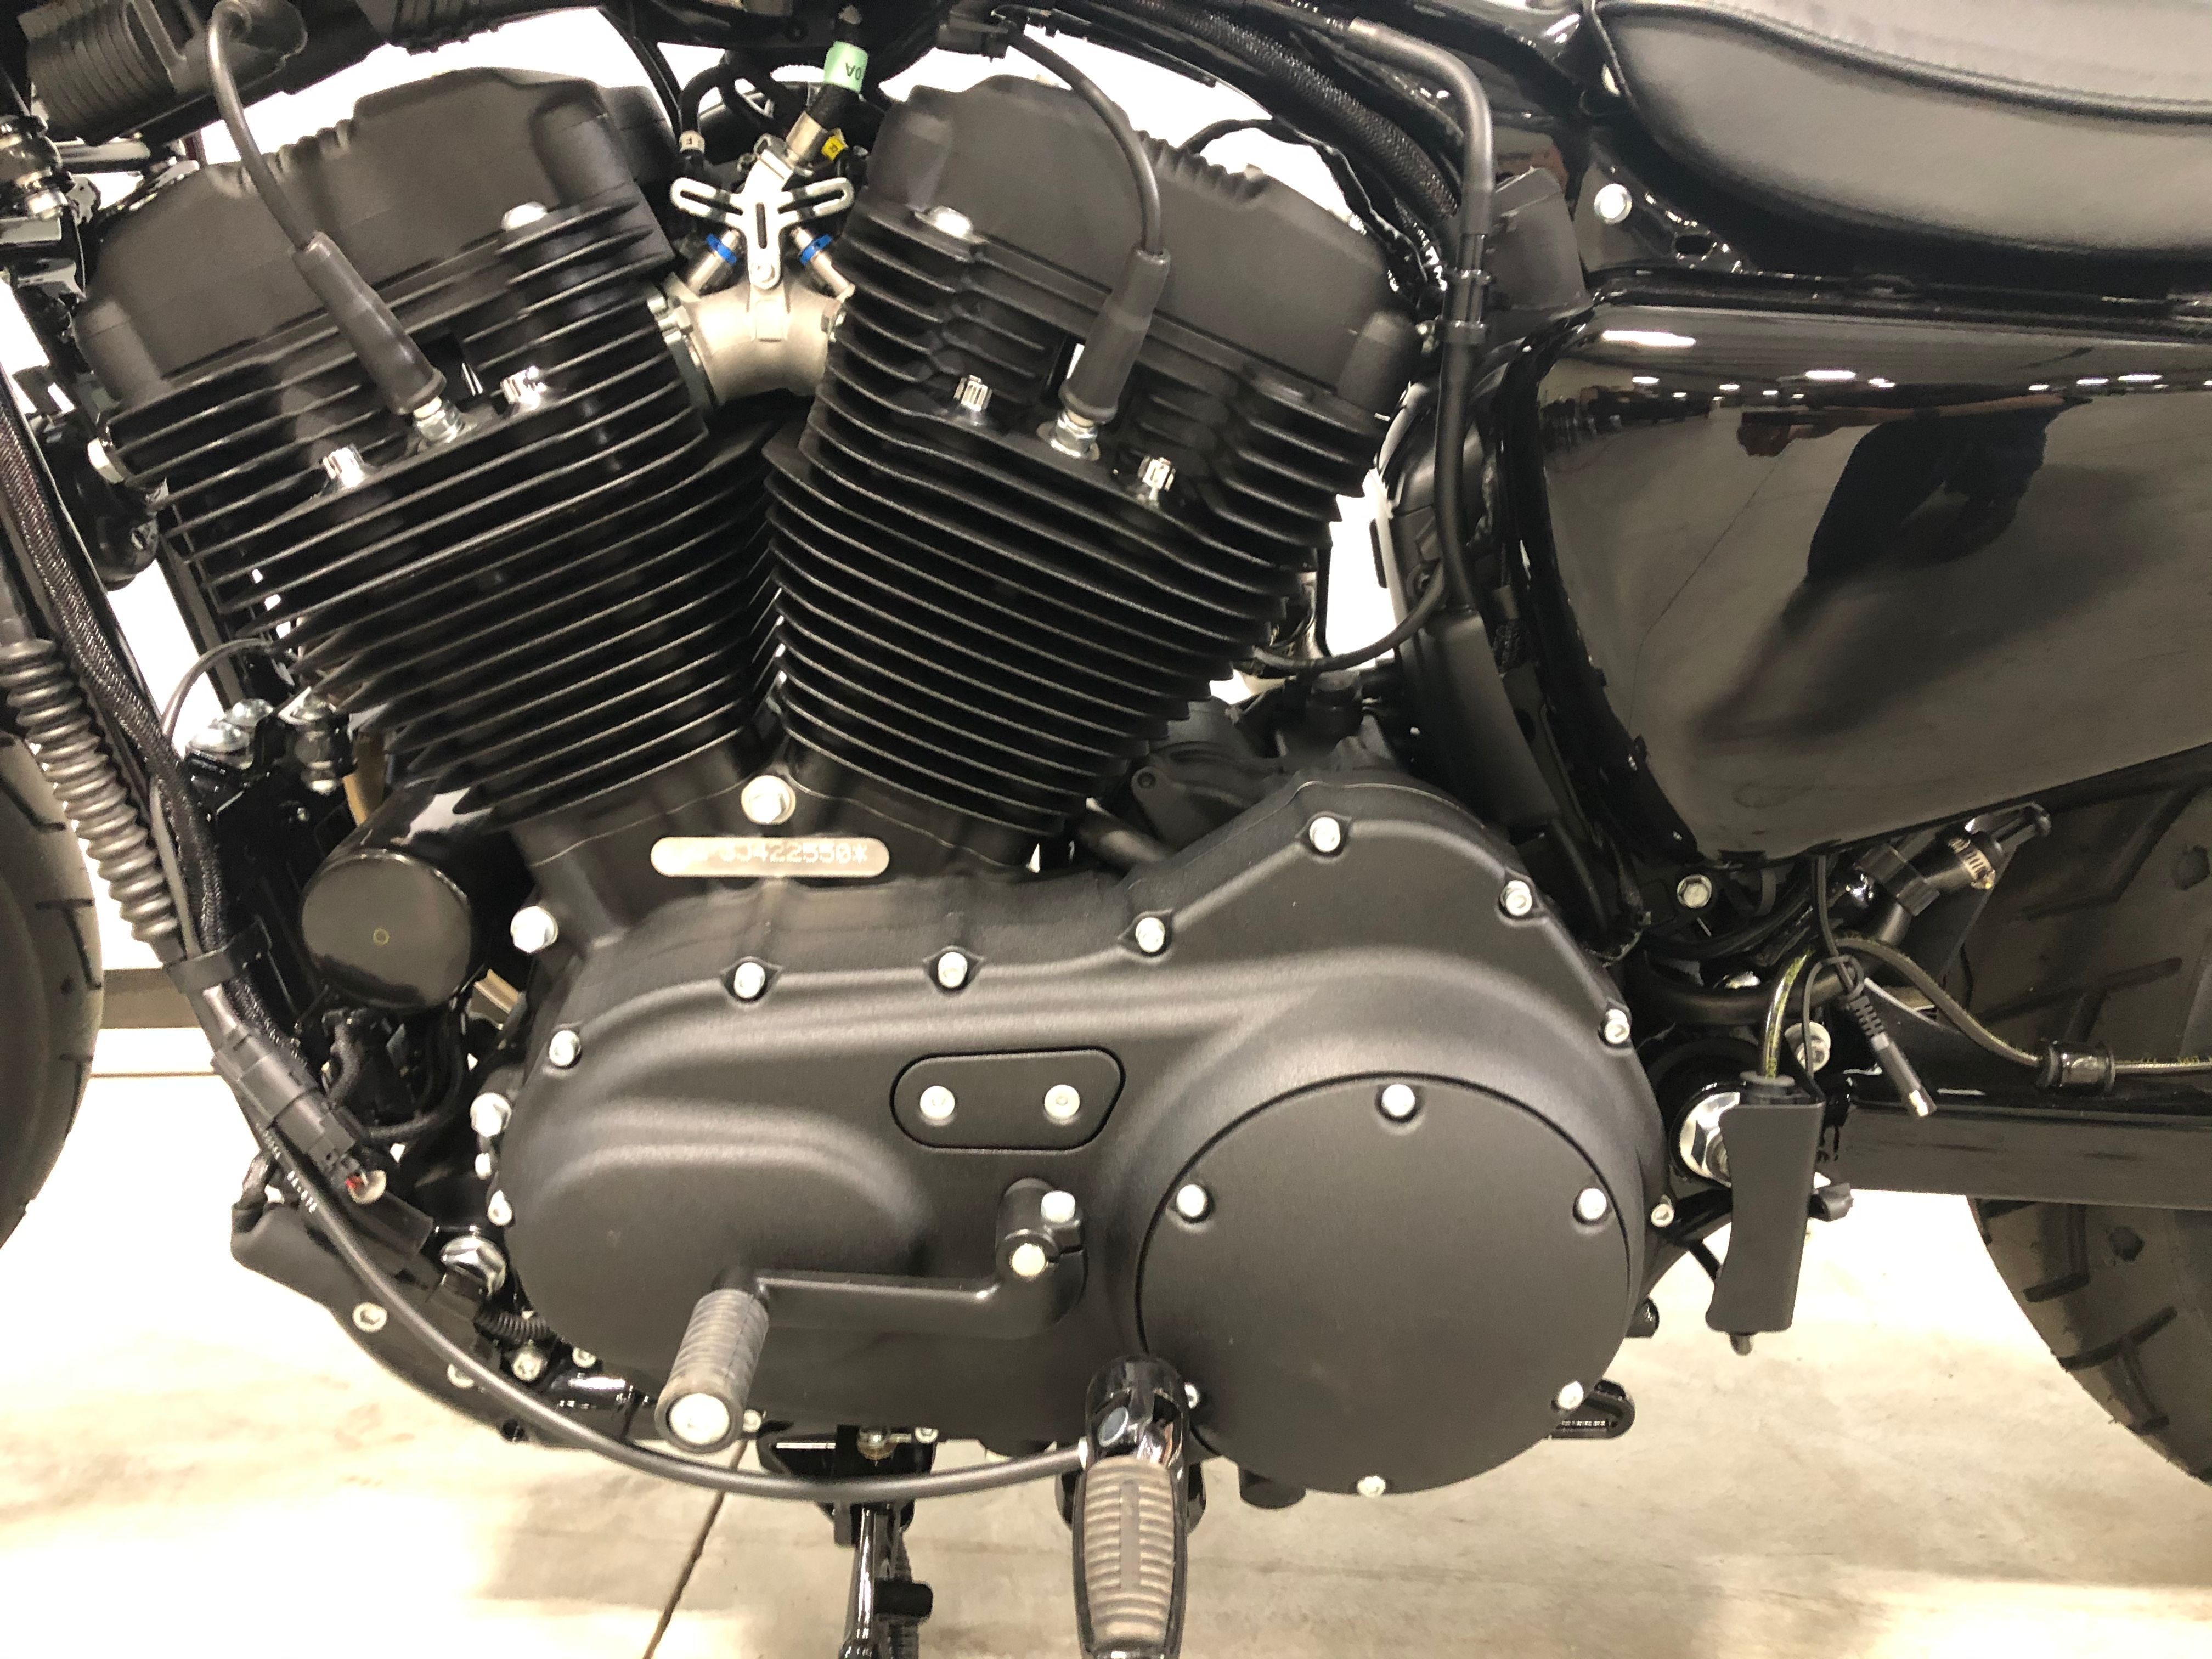 Pre-Owned 2019 Harley-Davidson Iron 1200 XL1200NS